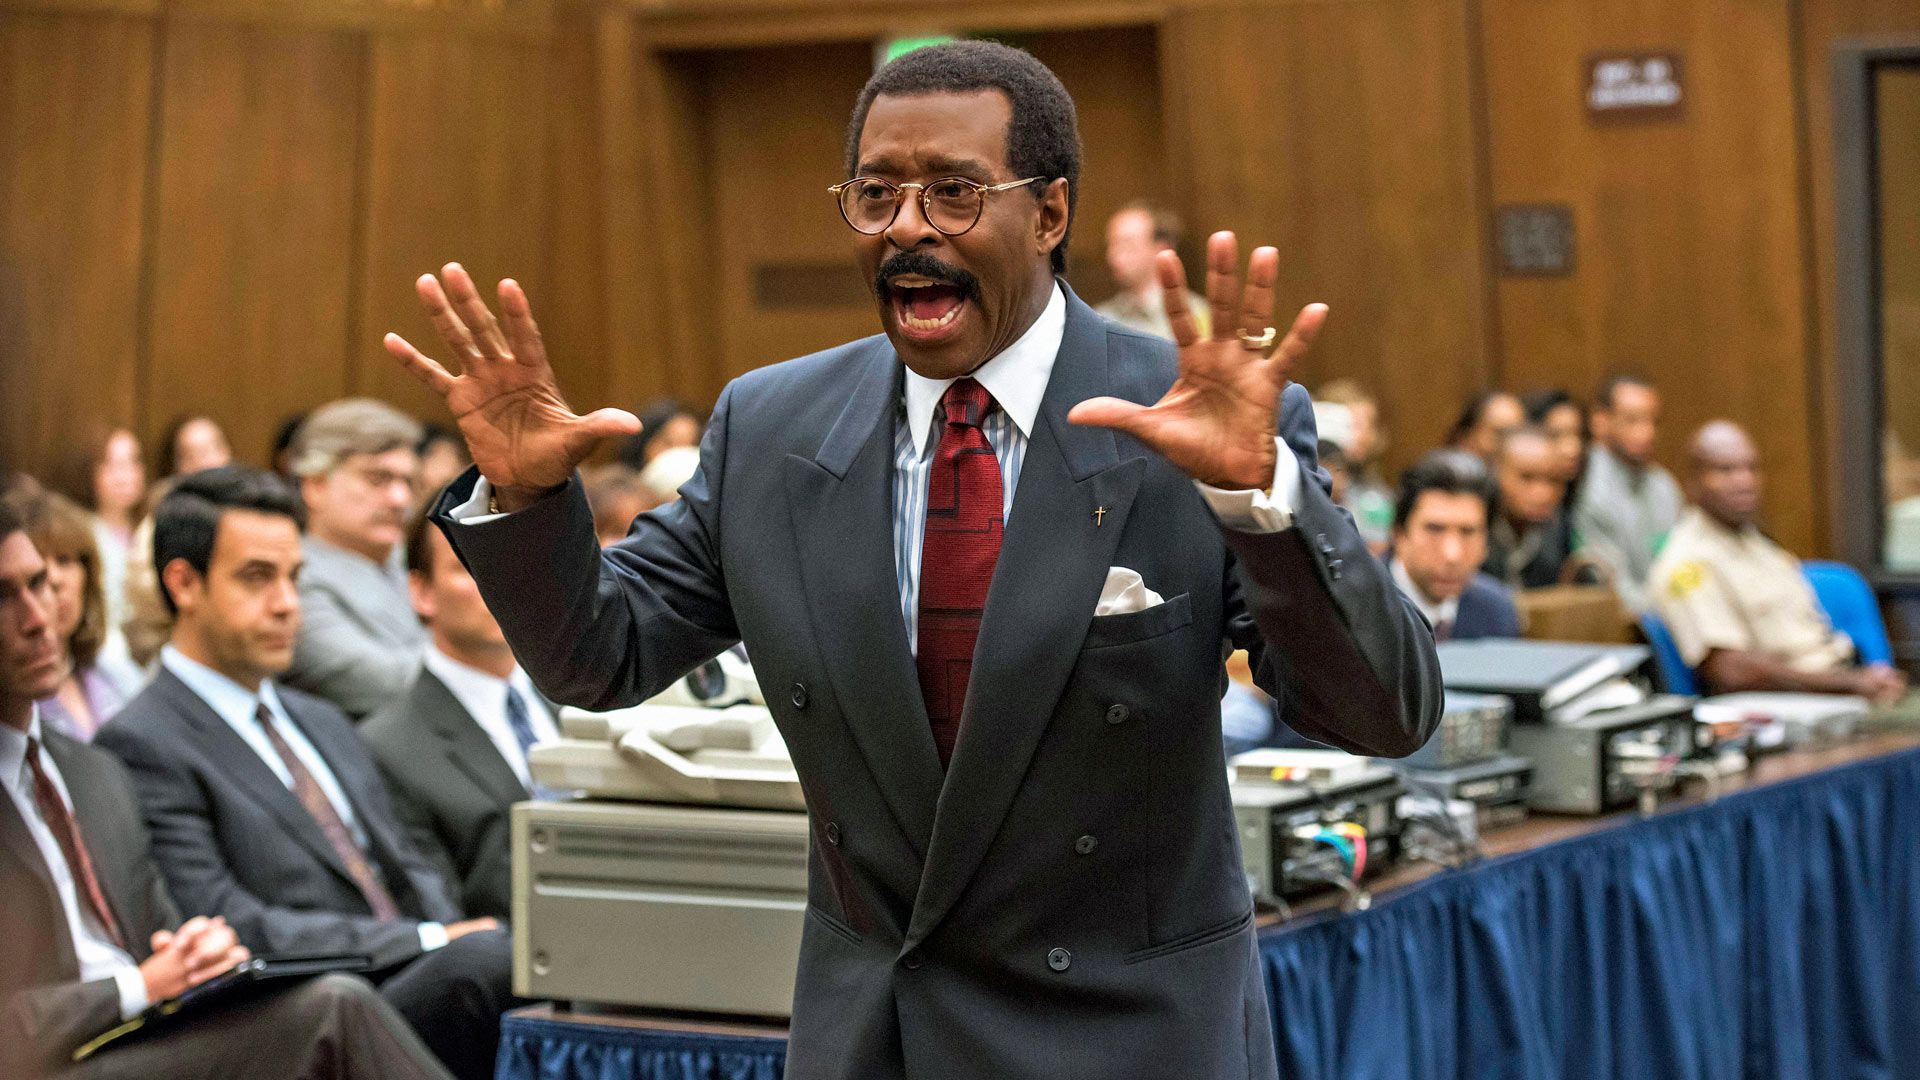 Courtney B Vance in "The People vs. O.J. Simpson"